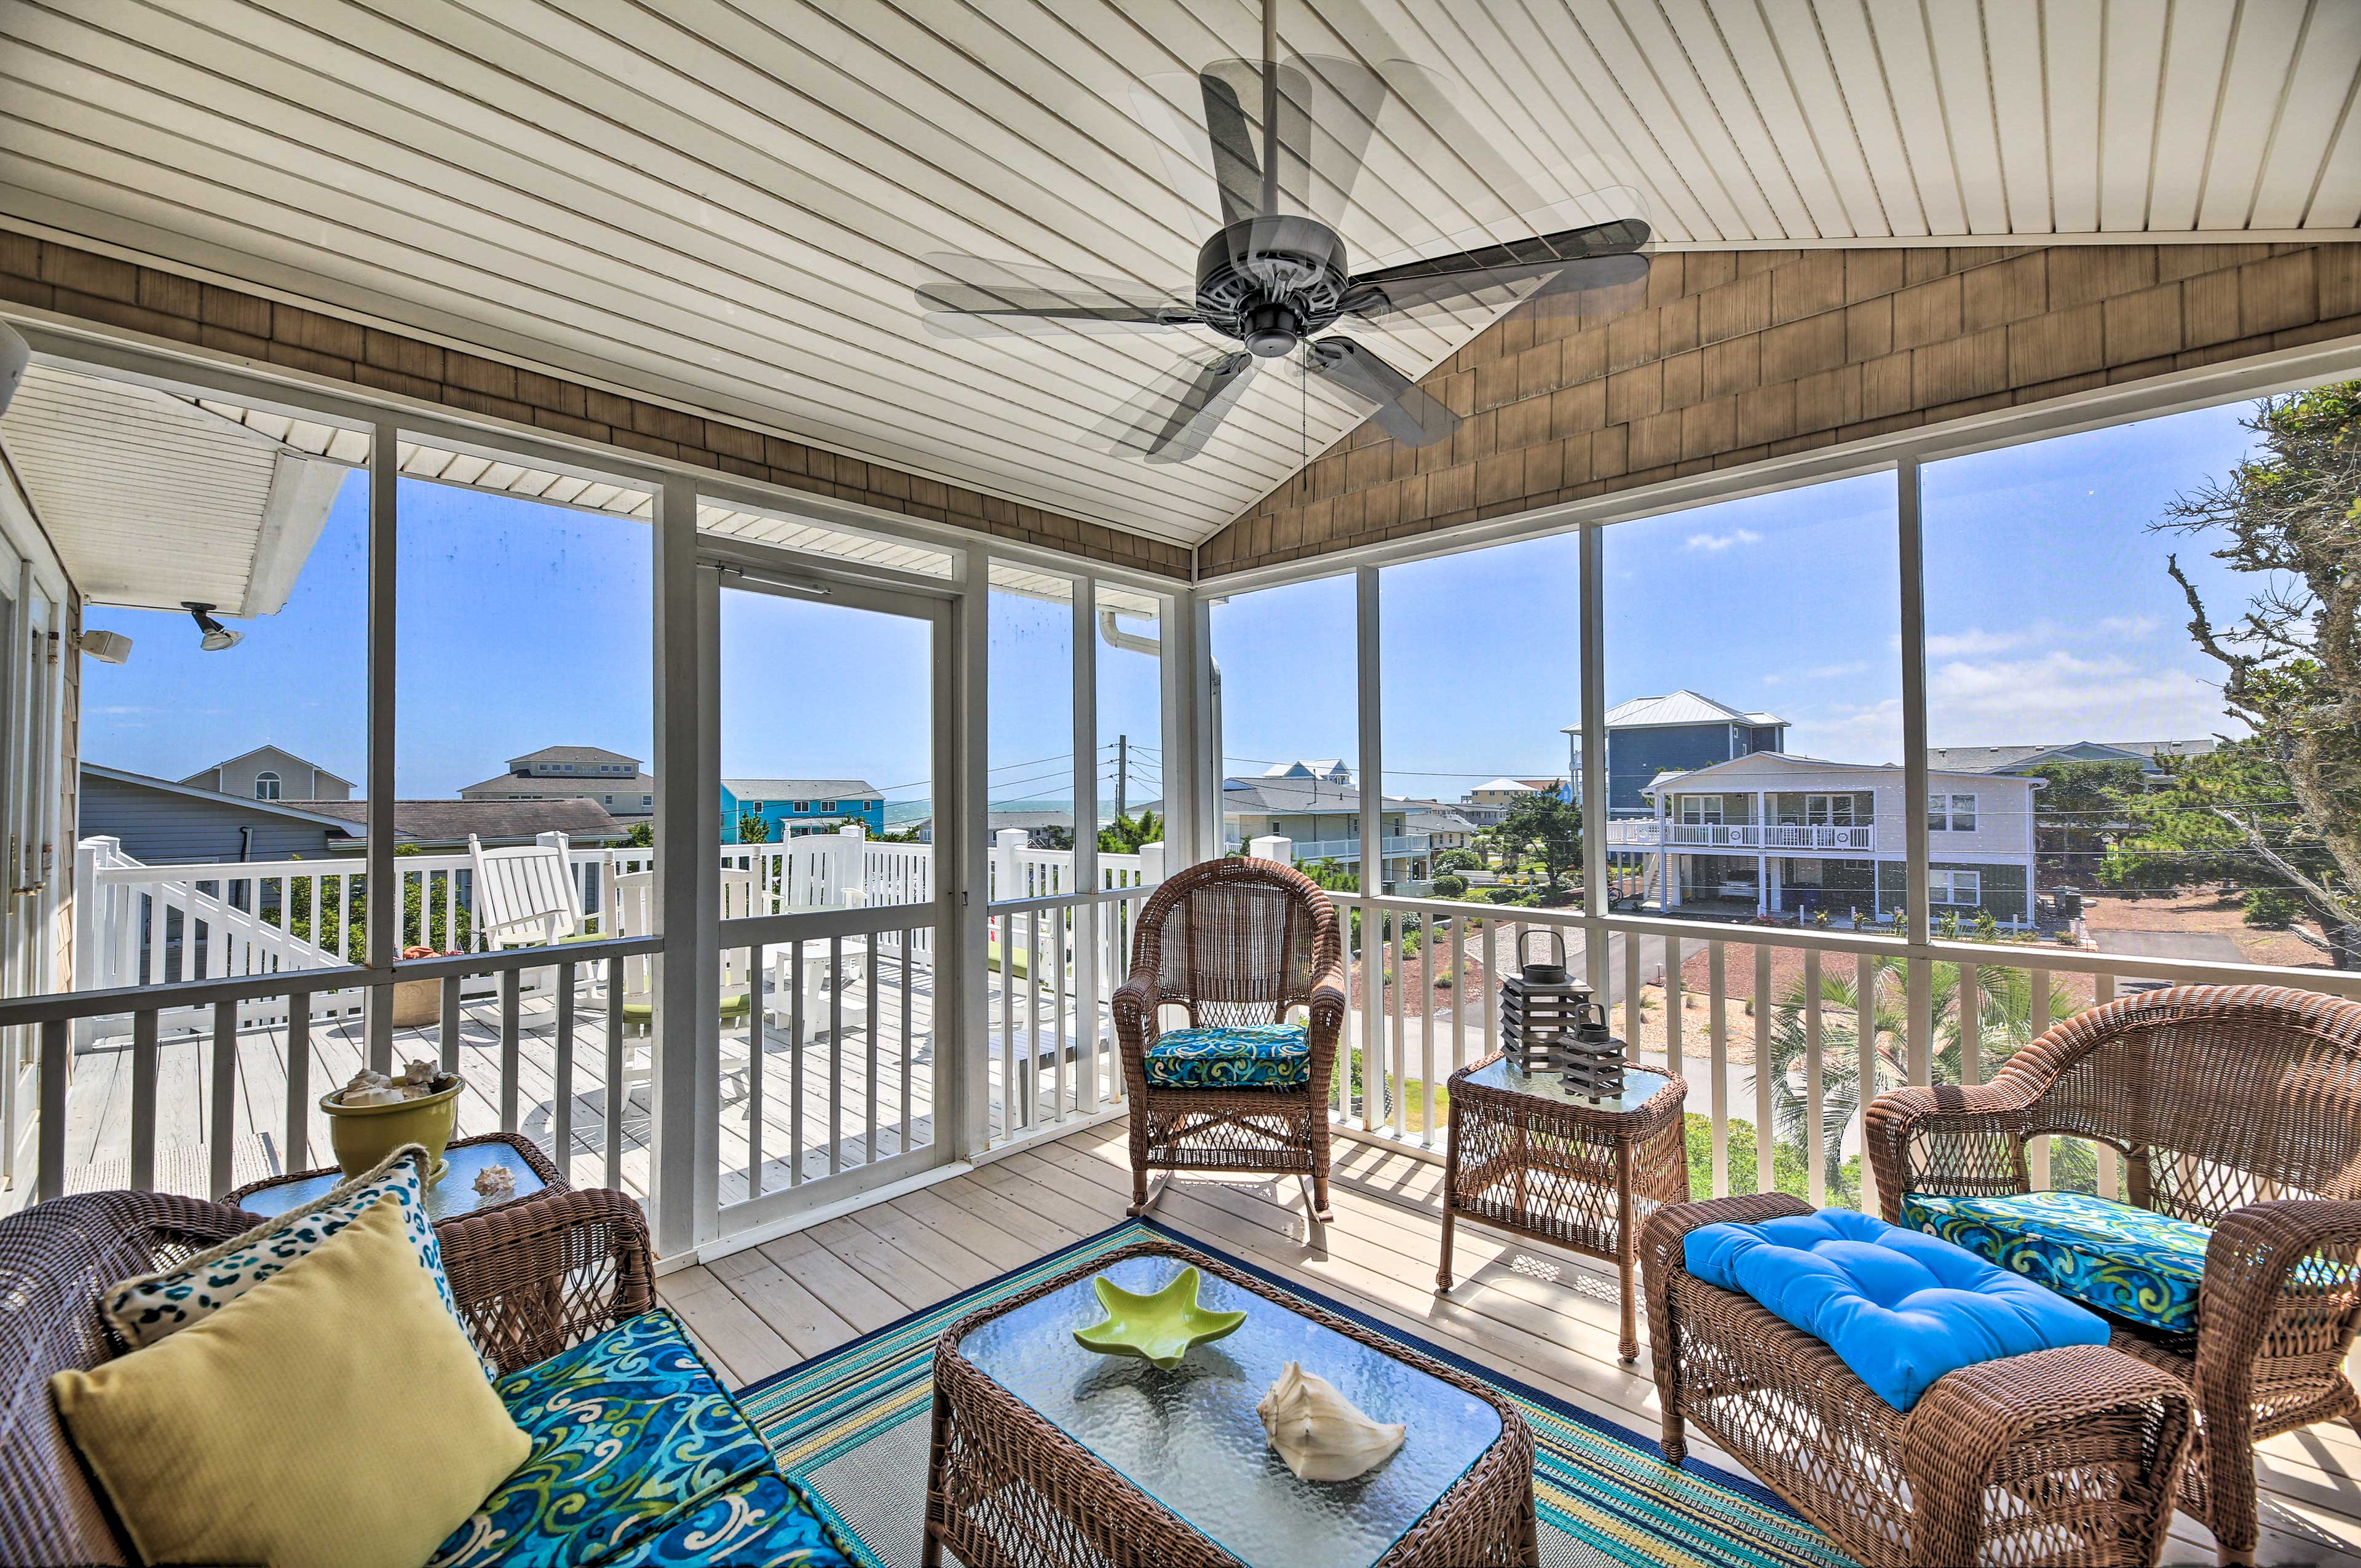 Emerald Isle Vacation Rental Home | 4BR | 3BA | 2 Stories | 1,756 Sq Ft